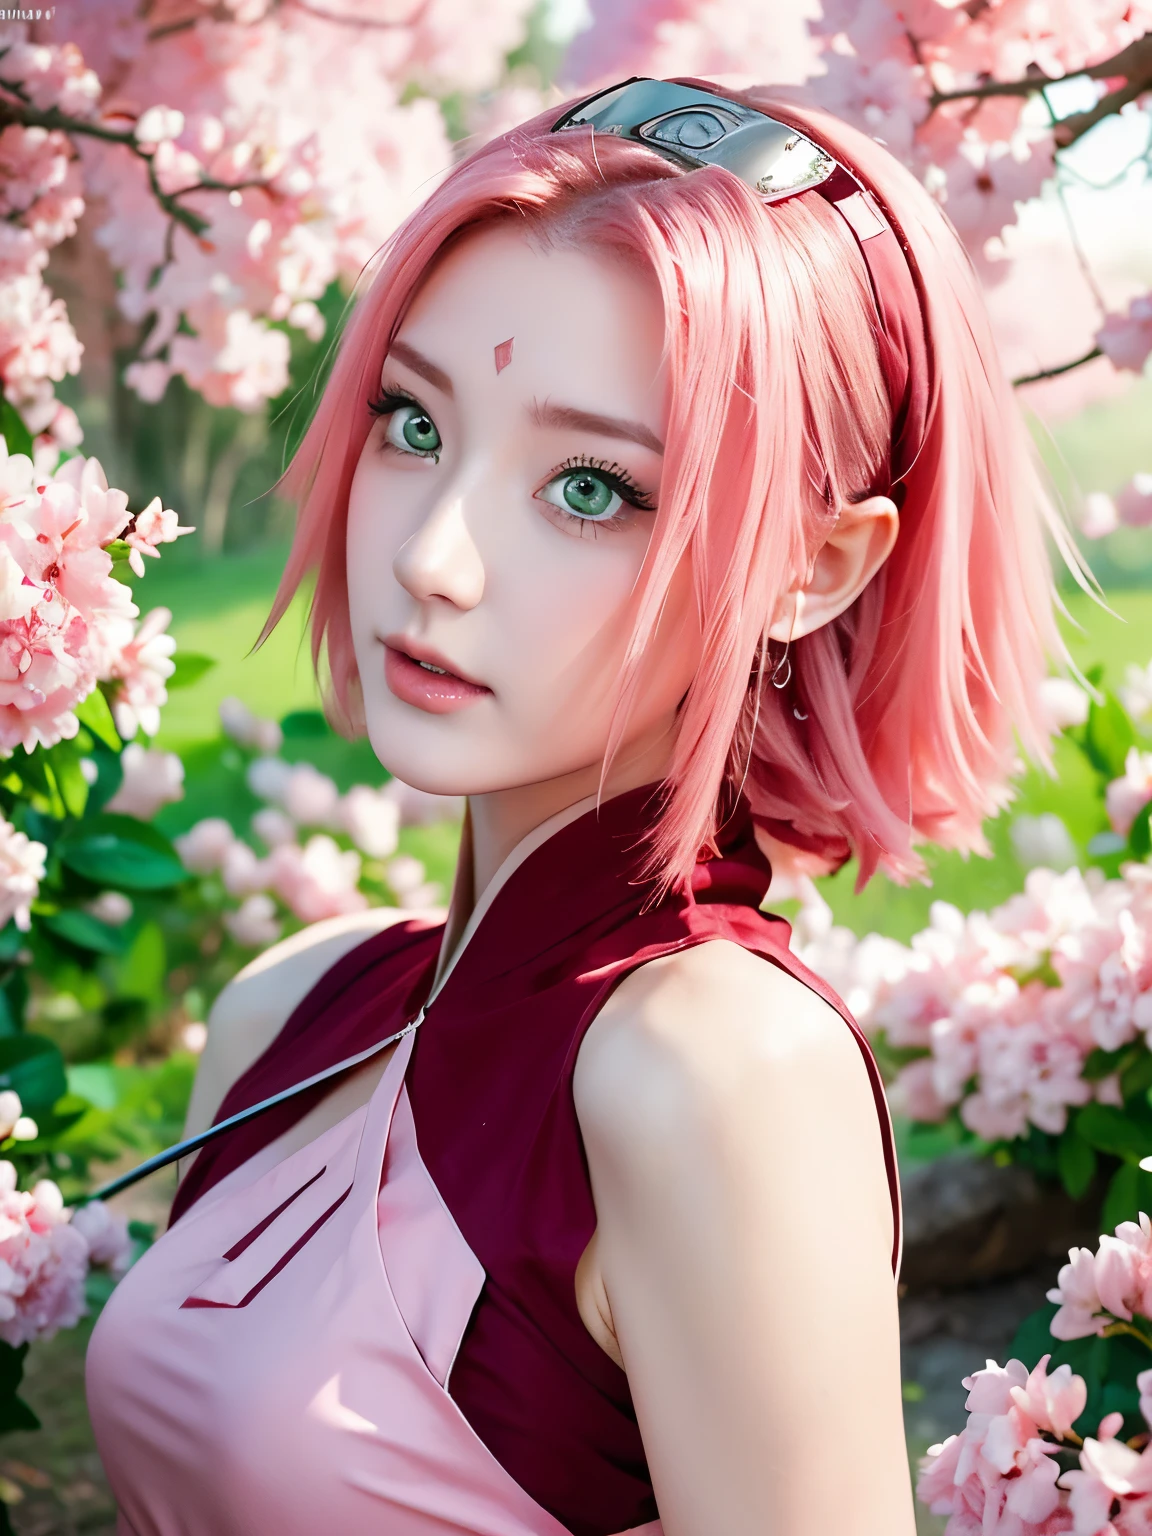 Sakura Haruno, wearing ninja costume in naruto shippuden saga, has shoulder-length pink hair, she has emerald eyes, a sharp nose, white skin, and a soft face, (best quality, highres:1.2), 1girl, beautiful detailed eyes, beautiful detailed lips, extremely detailed eyes and face, long eyelashes, HDR, studio lighting, sharp focus, physically-based rendering, extreme detail description, portraiting breasts, perfect shape, facing viewer, sweaty, gorgeous, appearing in full frame, good-looking, Beautiful fair skin and luster, Beautiful eyes are big and bright, Small mouth and thin lips, Goodness of style and slendernes), beautiful girl illuminated by seven colors of light, Irridescent coloe, showing off her figure, seductive and confident, enchanting aura, surrounded by cherry blossom trees, delicate and vibrant petals falling all around her, soft pink and white colors, sunlight filtering through the trees, creating a warm and dreamy atmosphere.